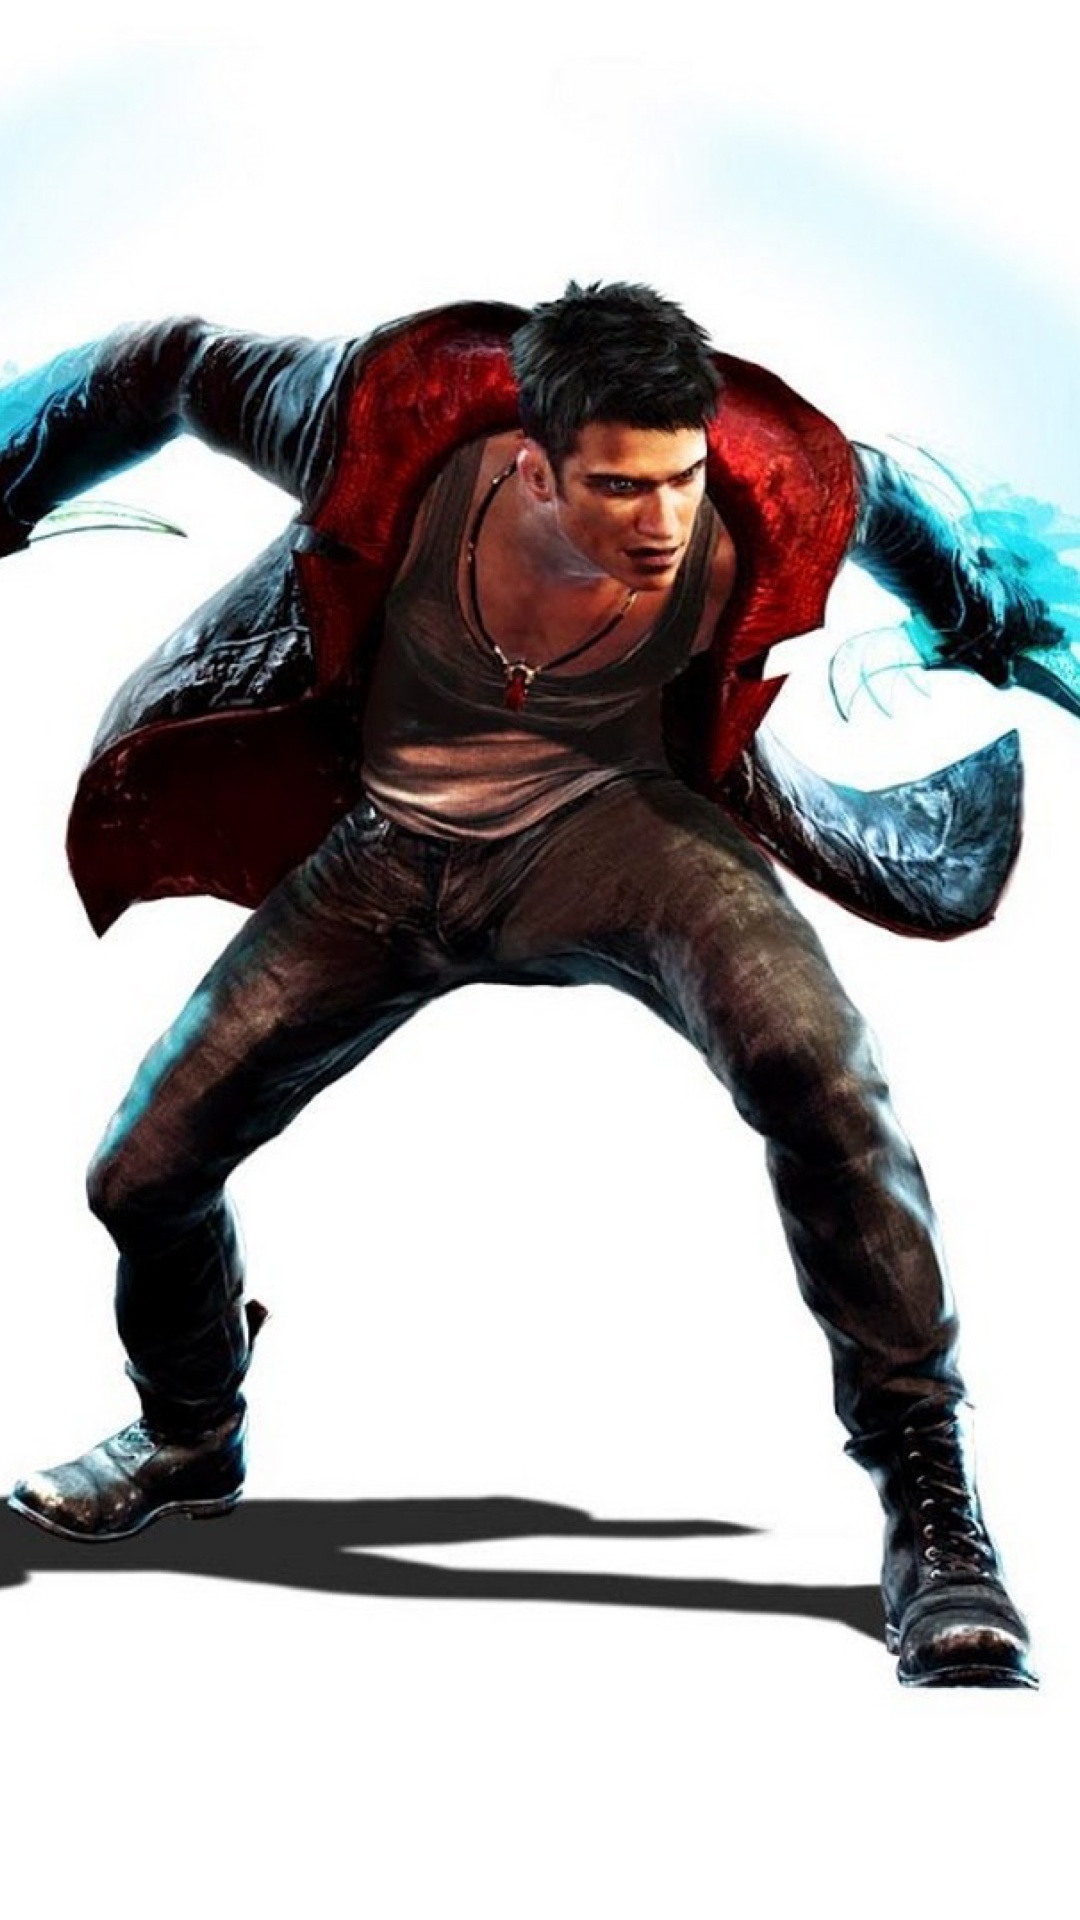 Dante DmC 5, The Devil May Cry Wallpaper for iPhone 6 Plus